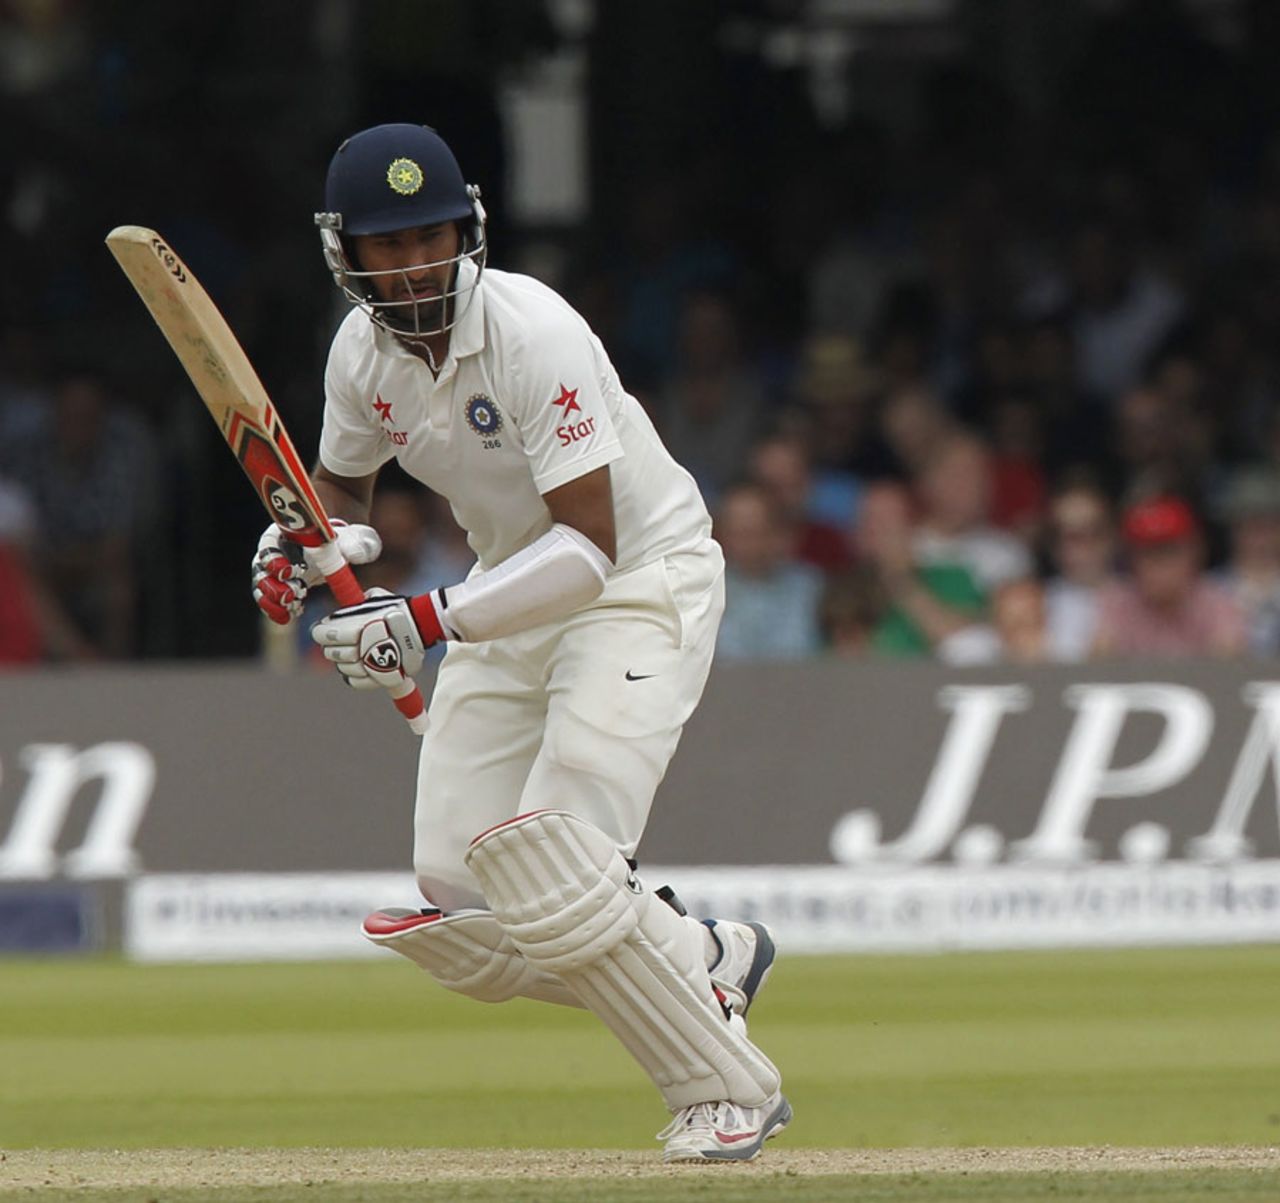 Cheteshwar Pujara collects some runs, England v India, 2nd Investec Test, Lord's, 3rd day, July 19, 2014